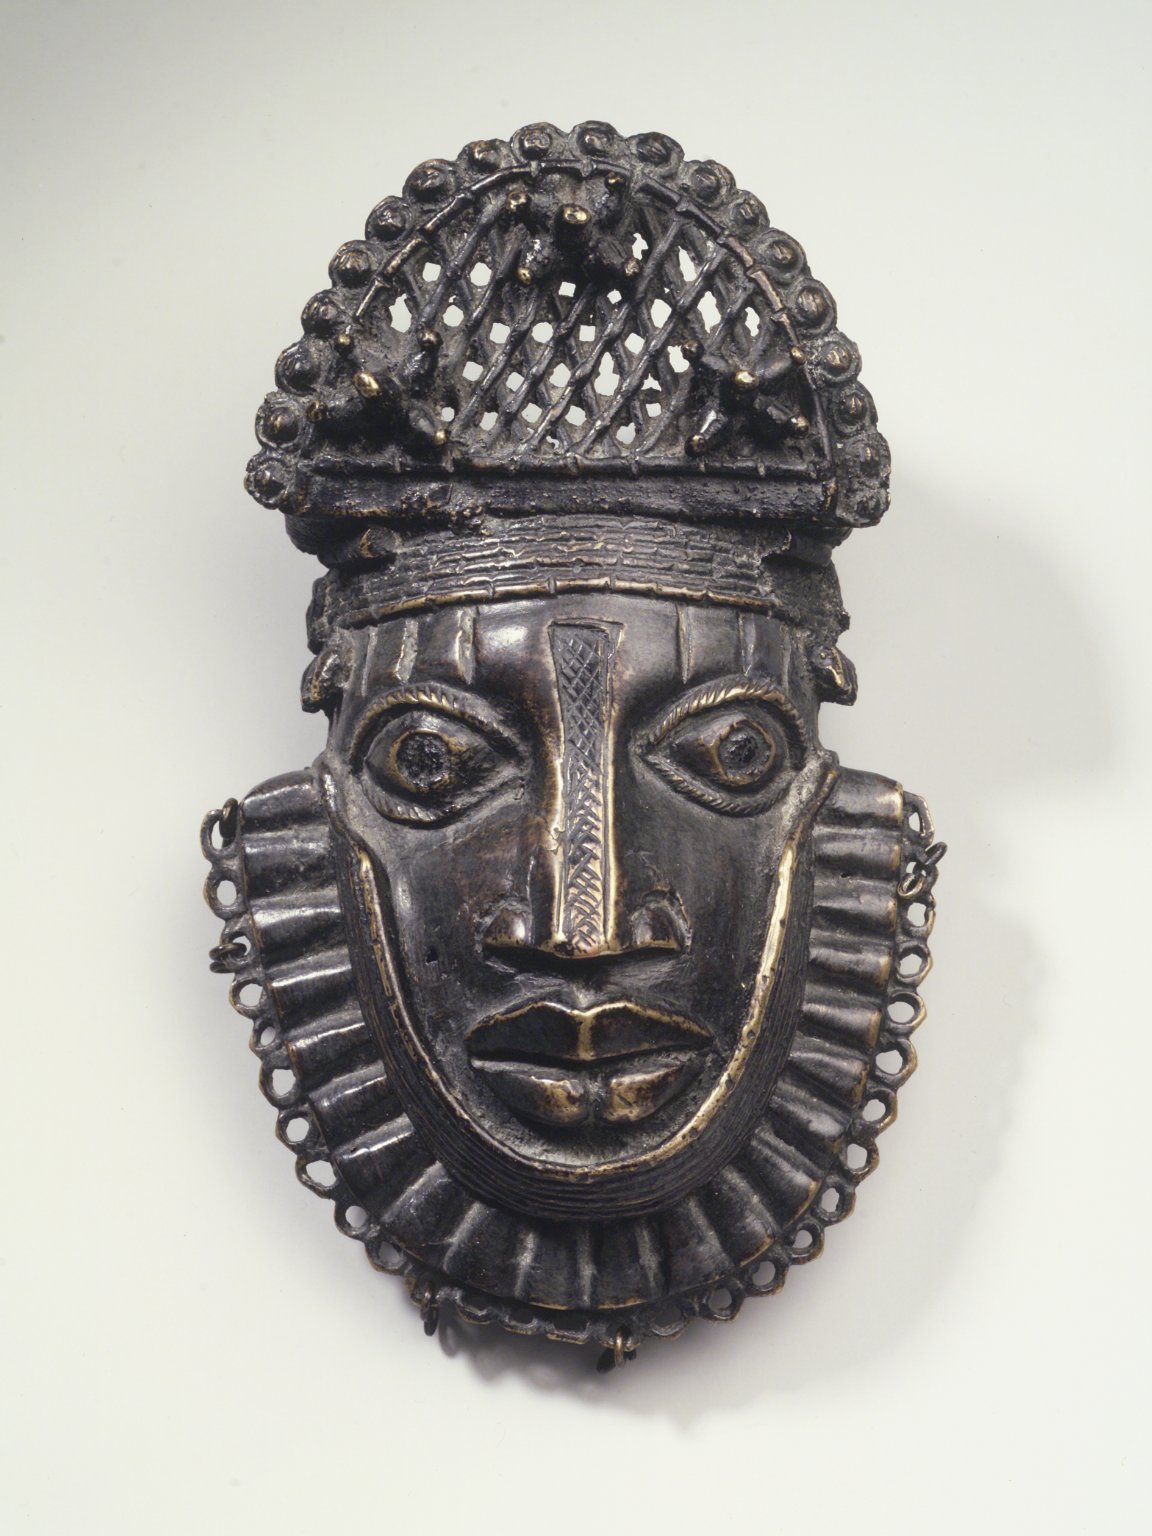 An ornate mask from the 18th century.